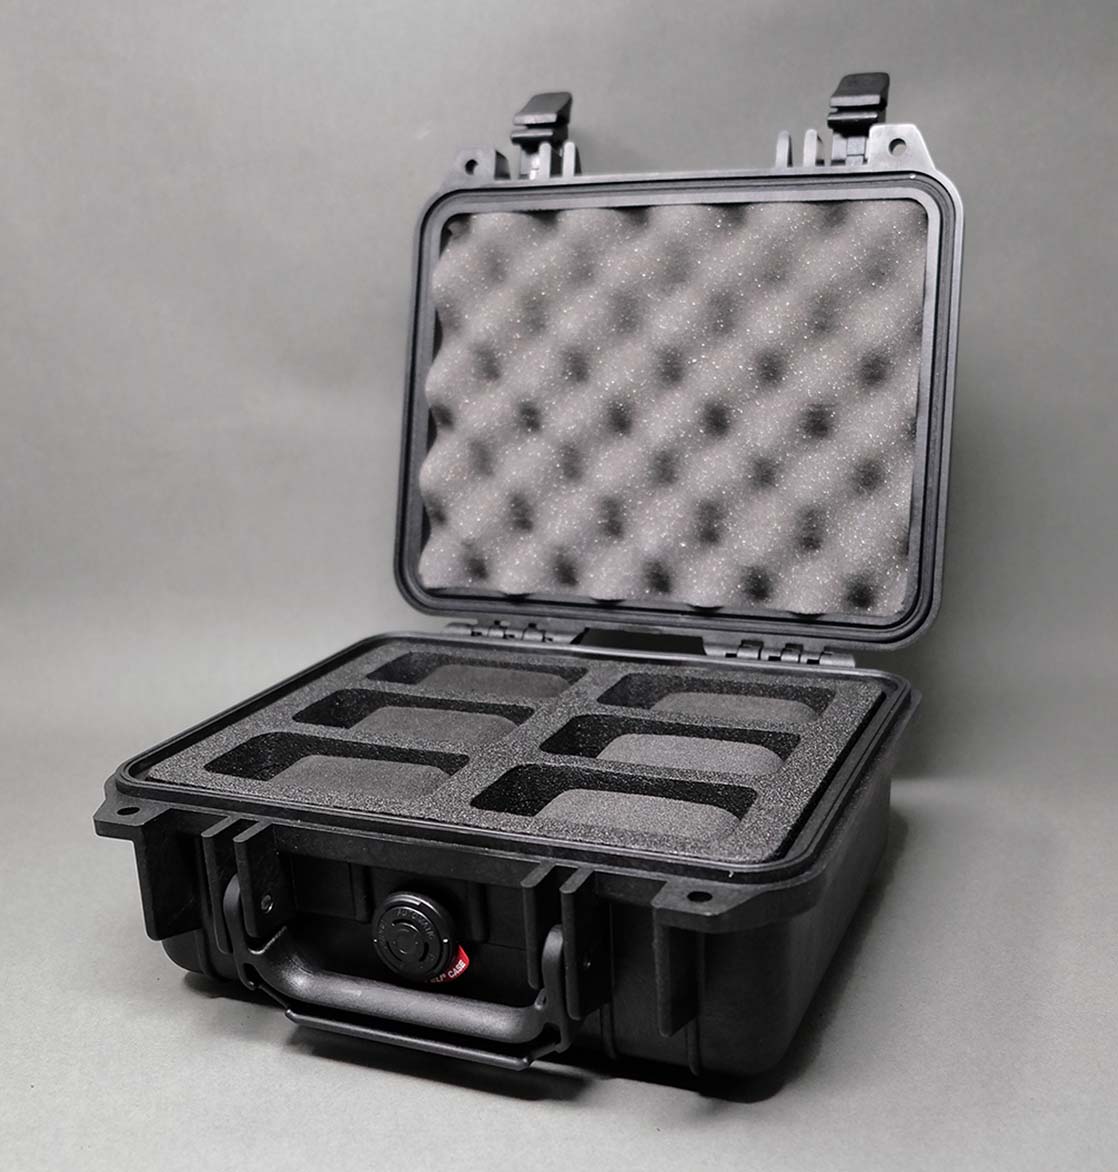 Elements VI - Peli Case for 6 Watches - To The Hour